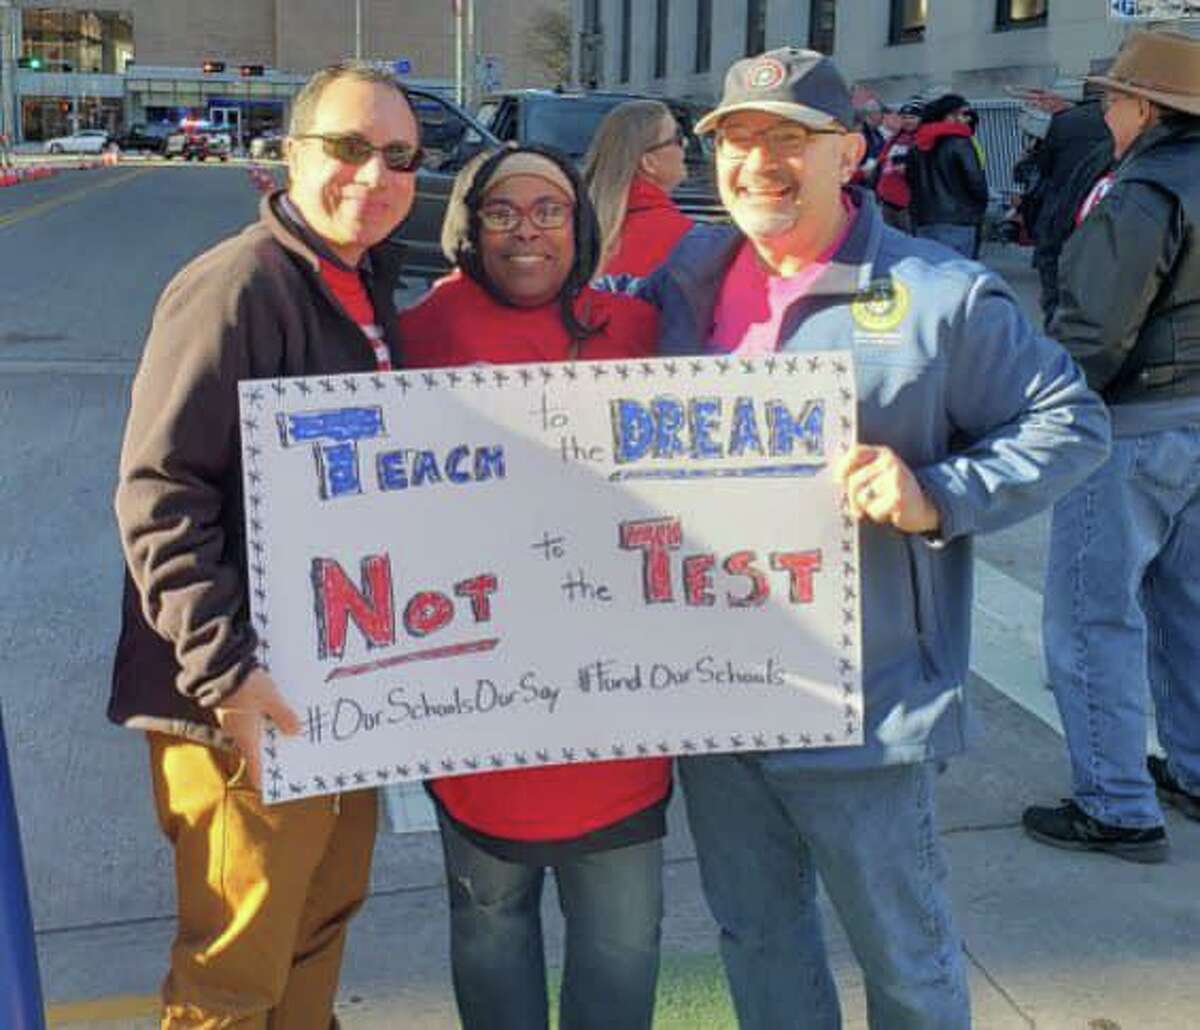 Jon Rosenthal, representative for Texas House District 135, is an advocate for teacher unions and rights for educators.